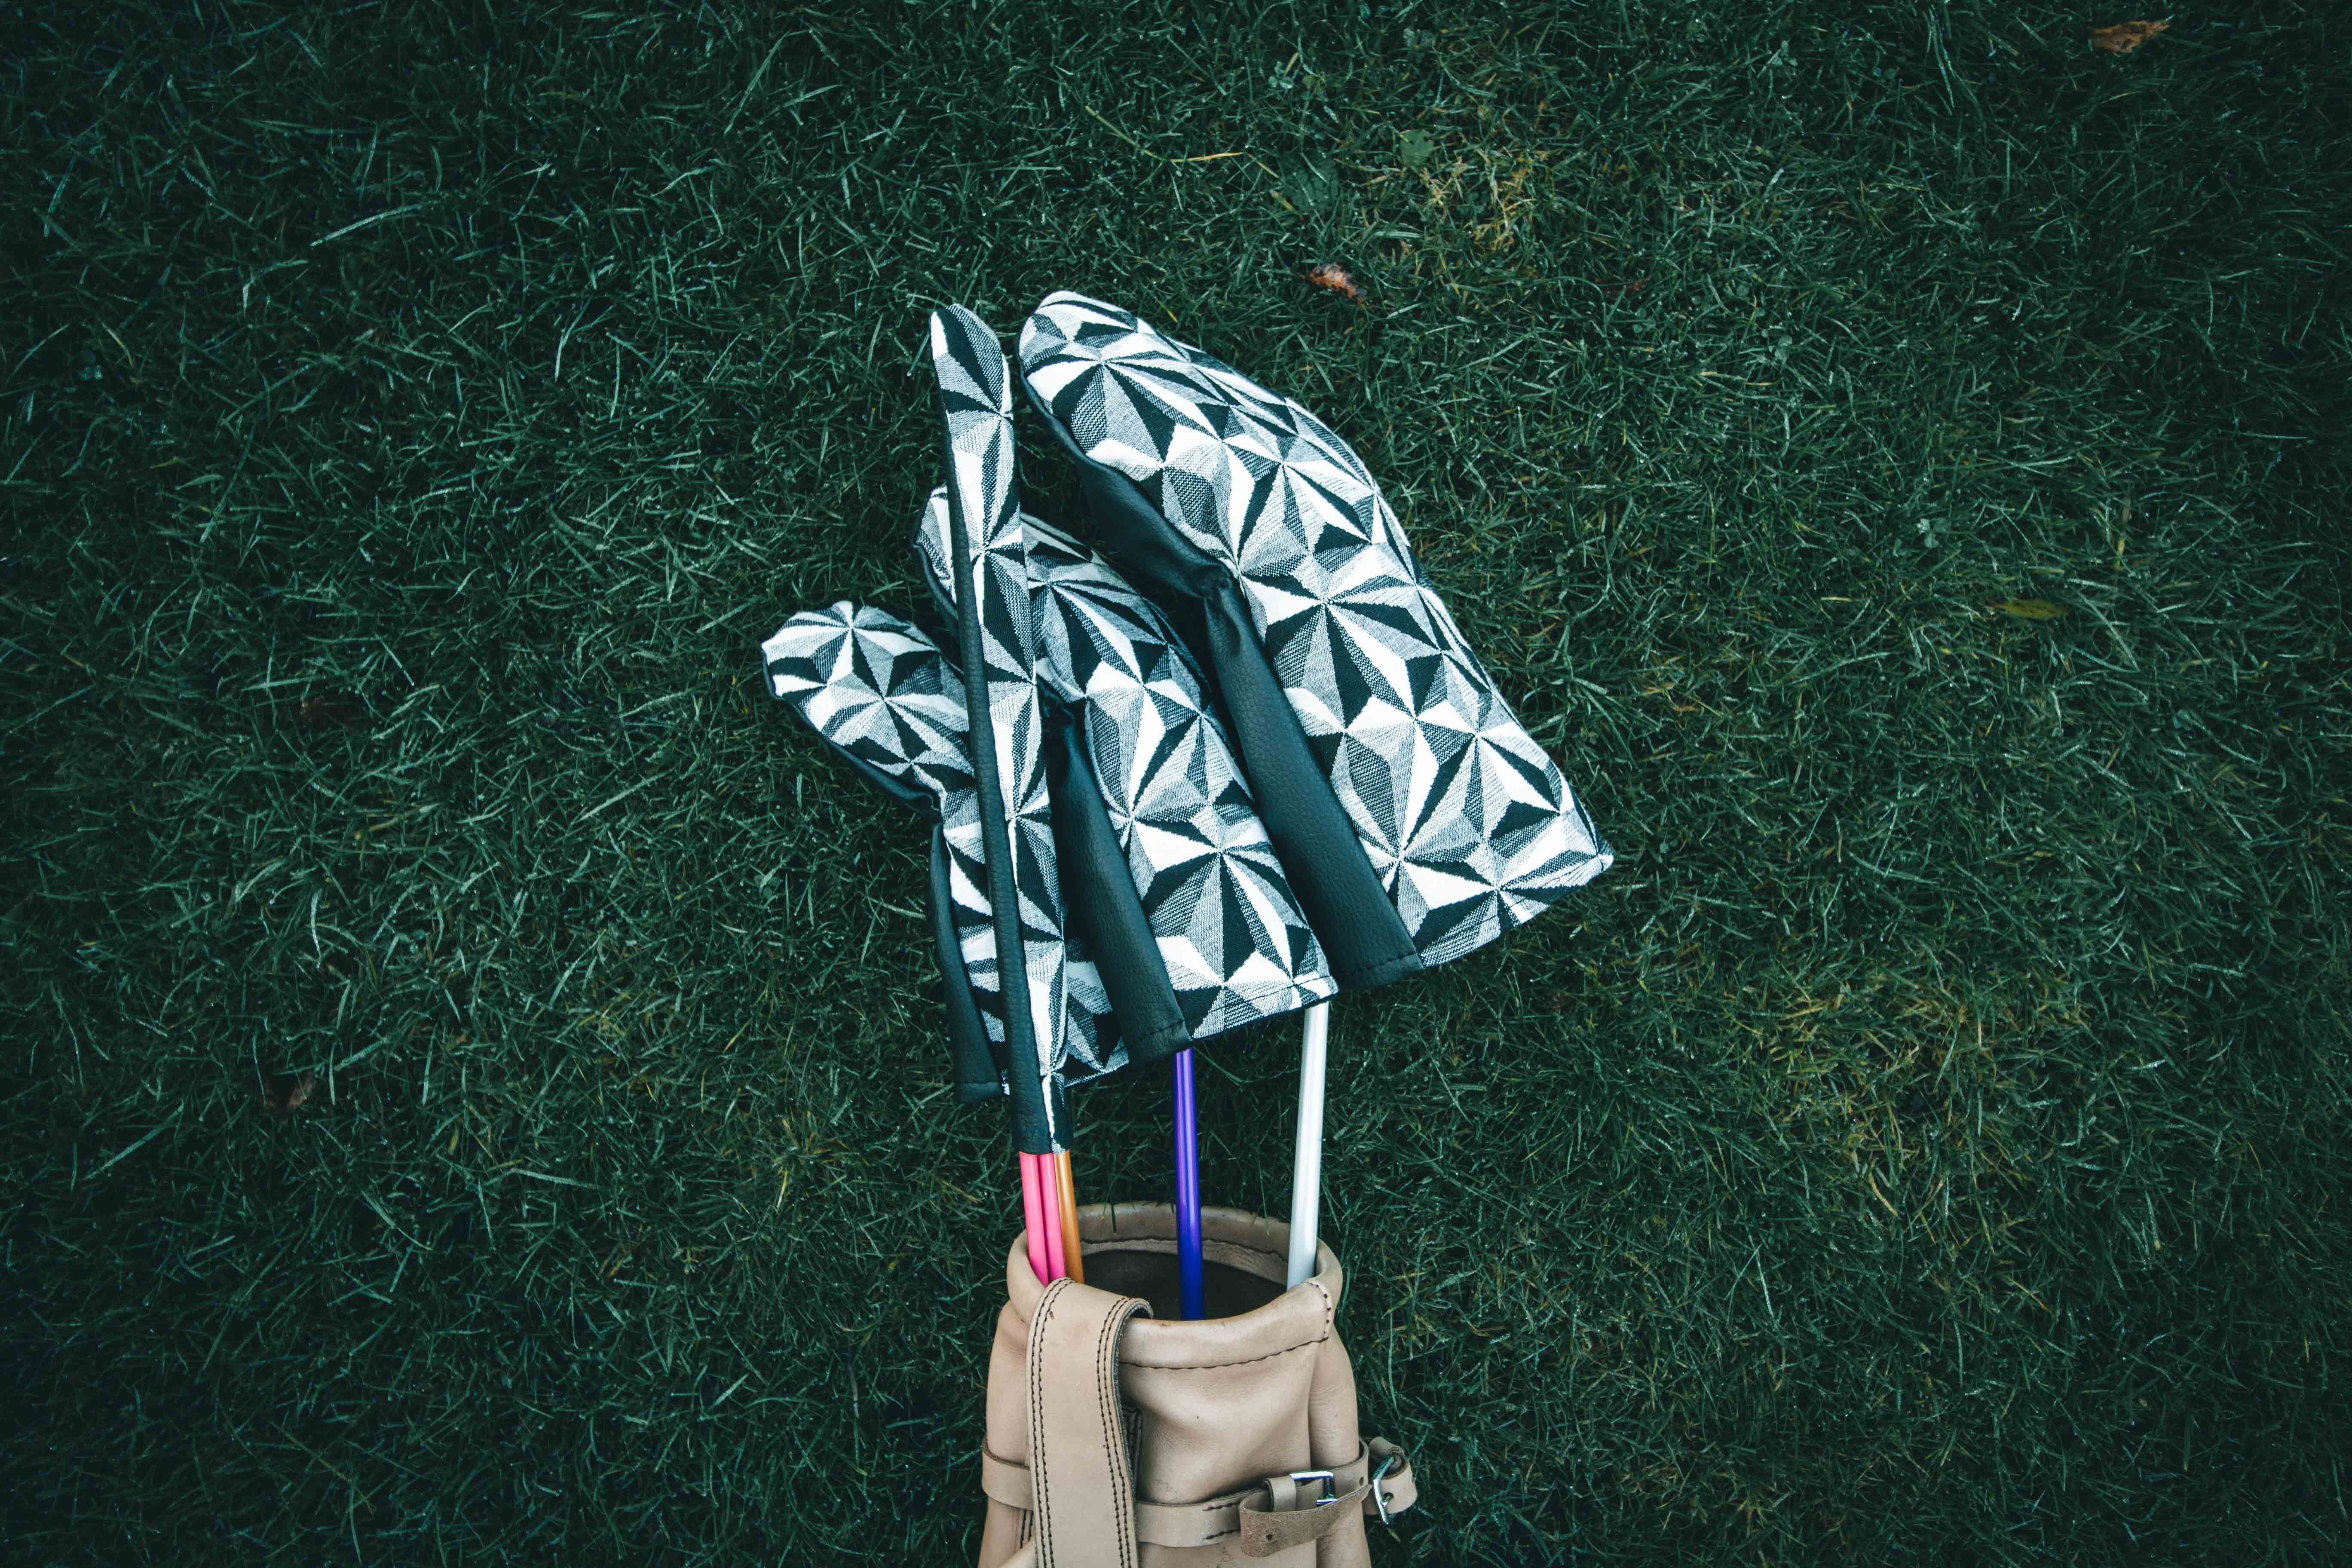 Black and White Patterned Headcovers